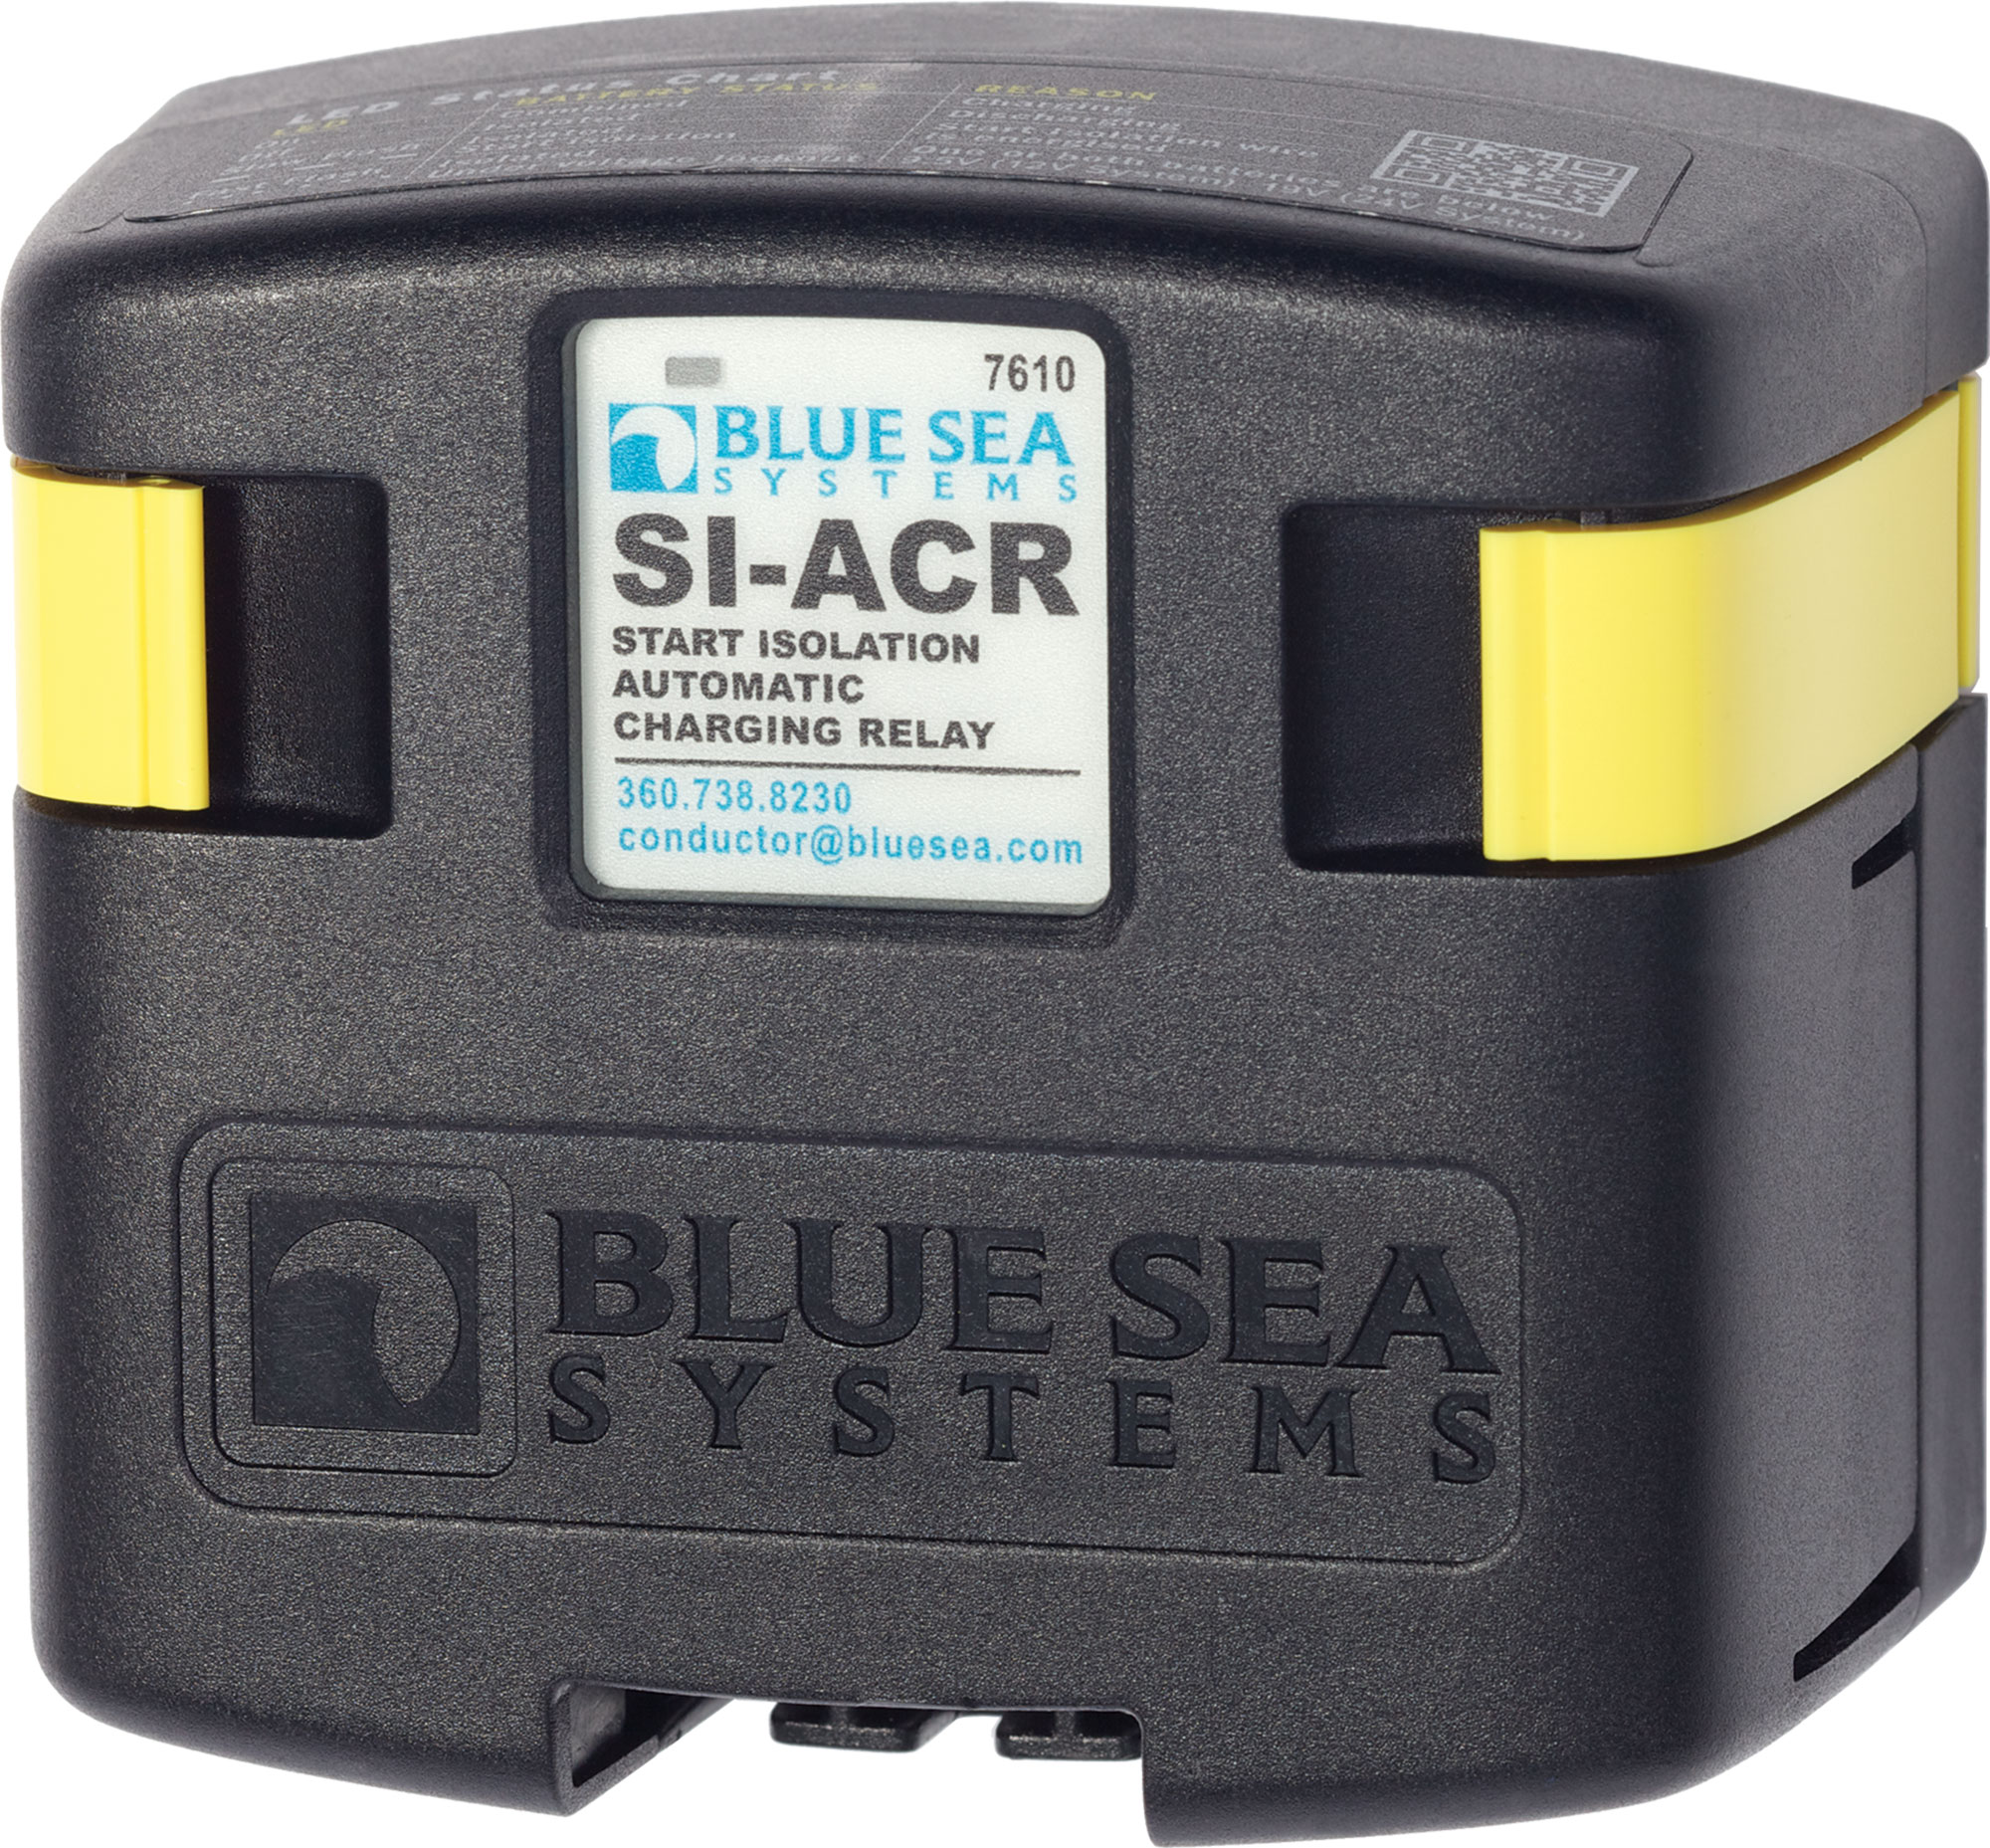 Part# 7610  Manufacturer Blue Sea Systems  Part Type Battery Solenoid